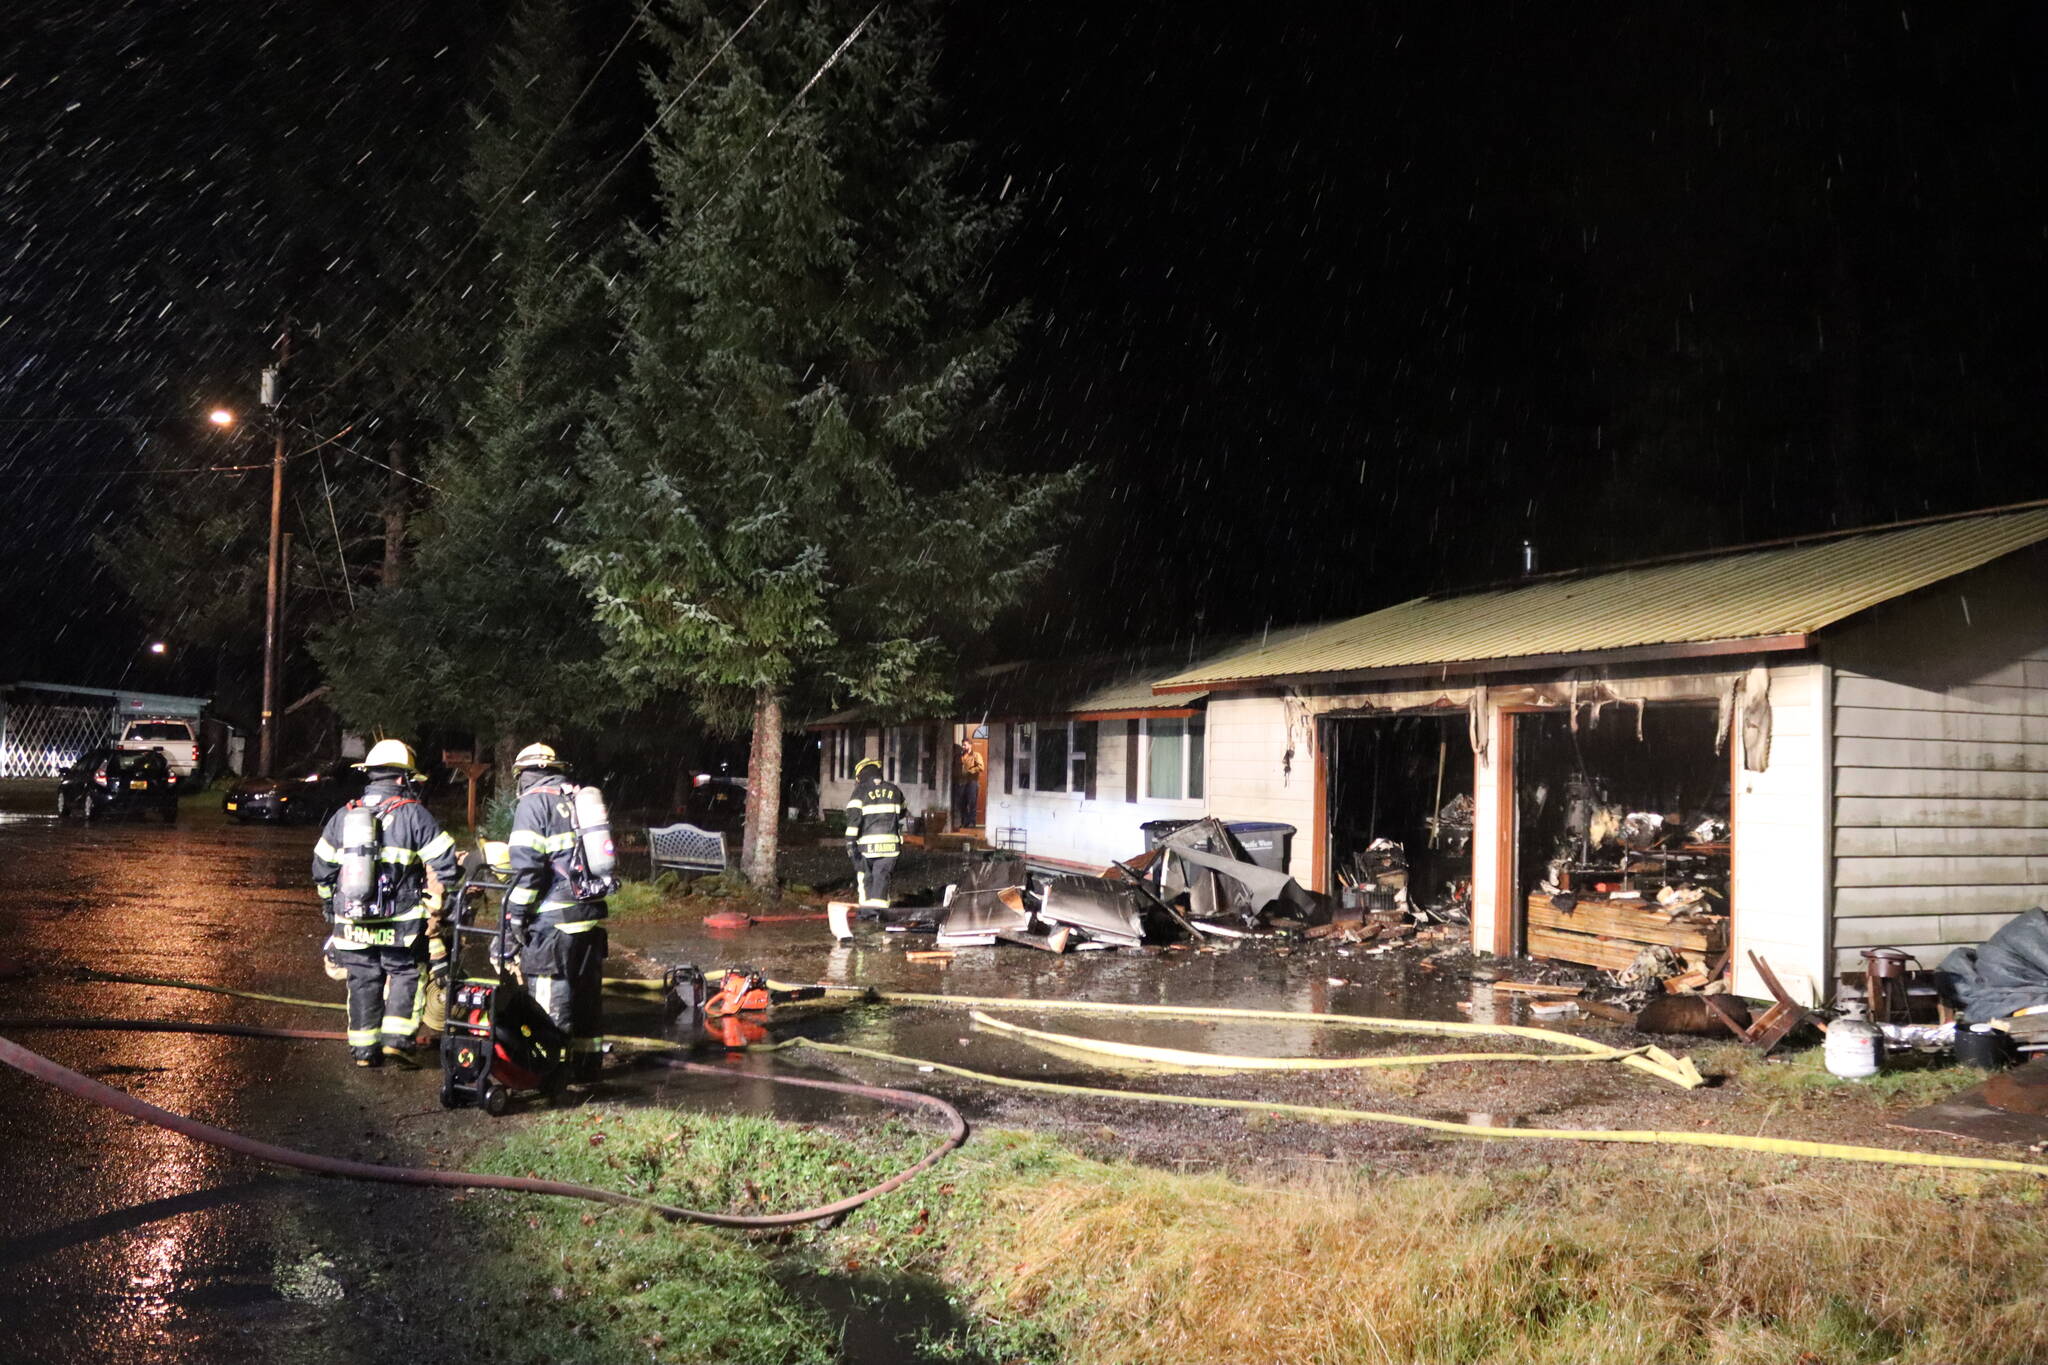 Capital City Fire/Rescue responds to a garage fire on El Camino Street on the evening of Monday, Nov. 13. CCFR issued a reminder for people to be proactive in protecting their homes after four fires were reported over the course of five days. (Meredith Jordan/ Juneau Empire)